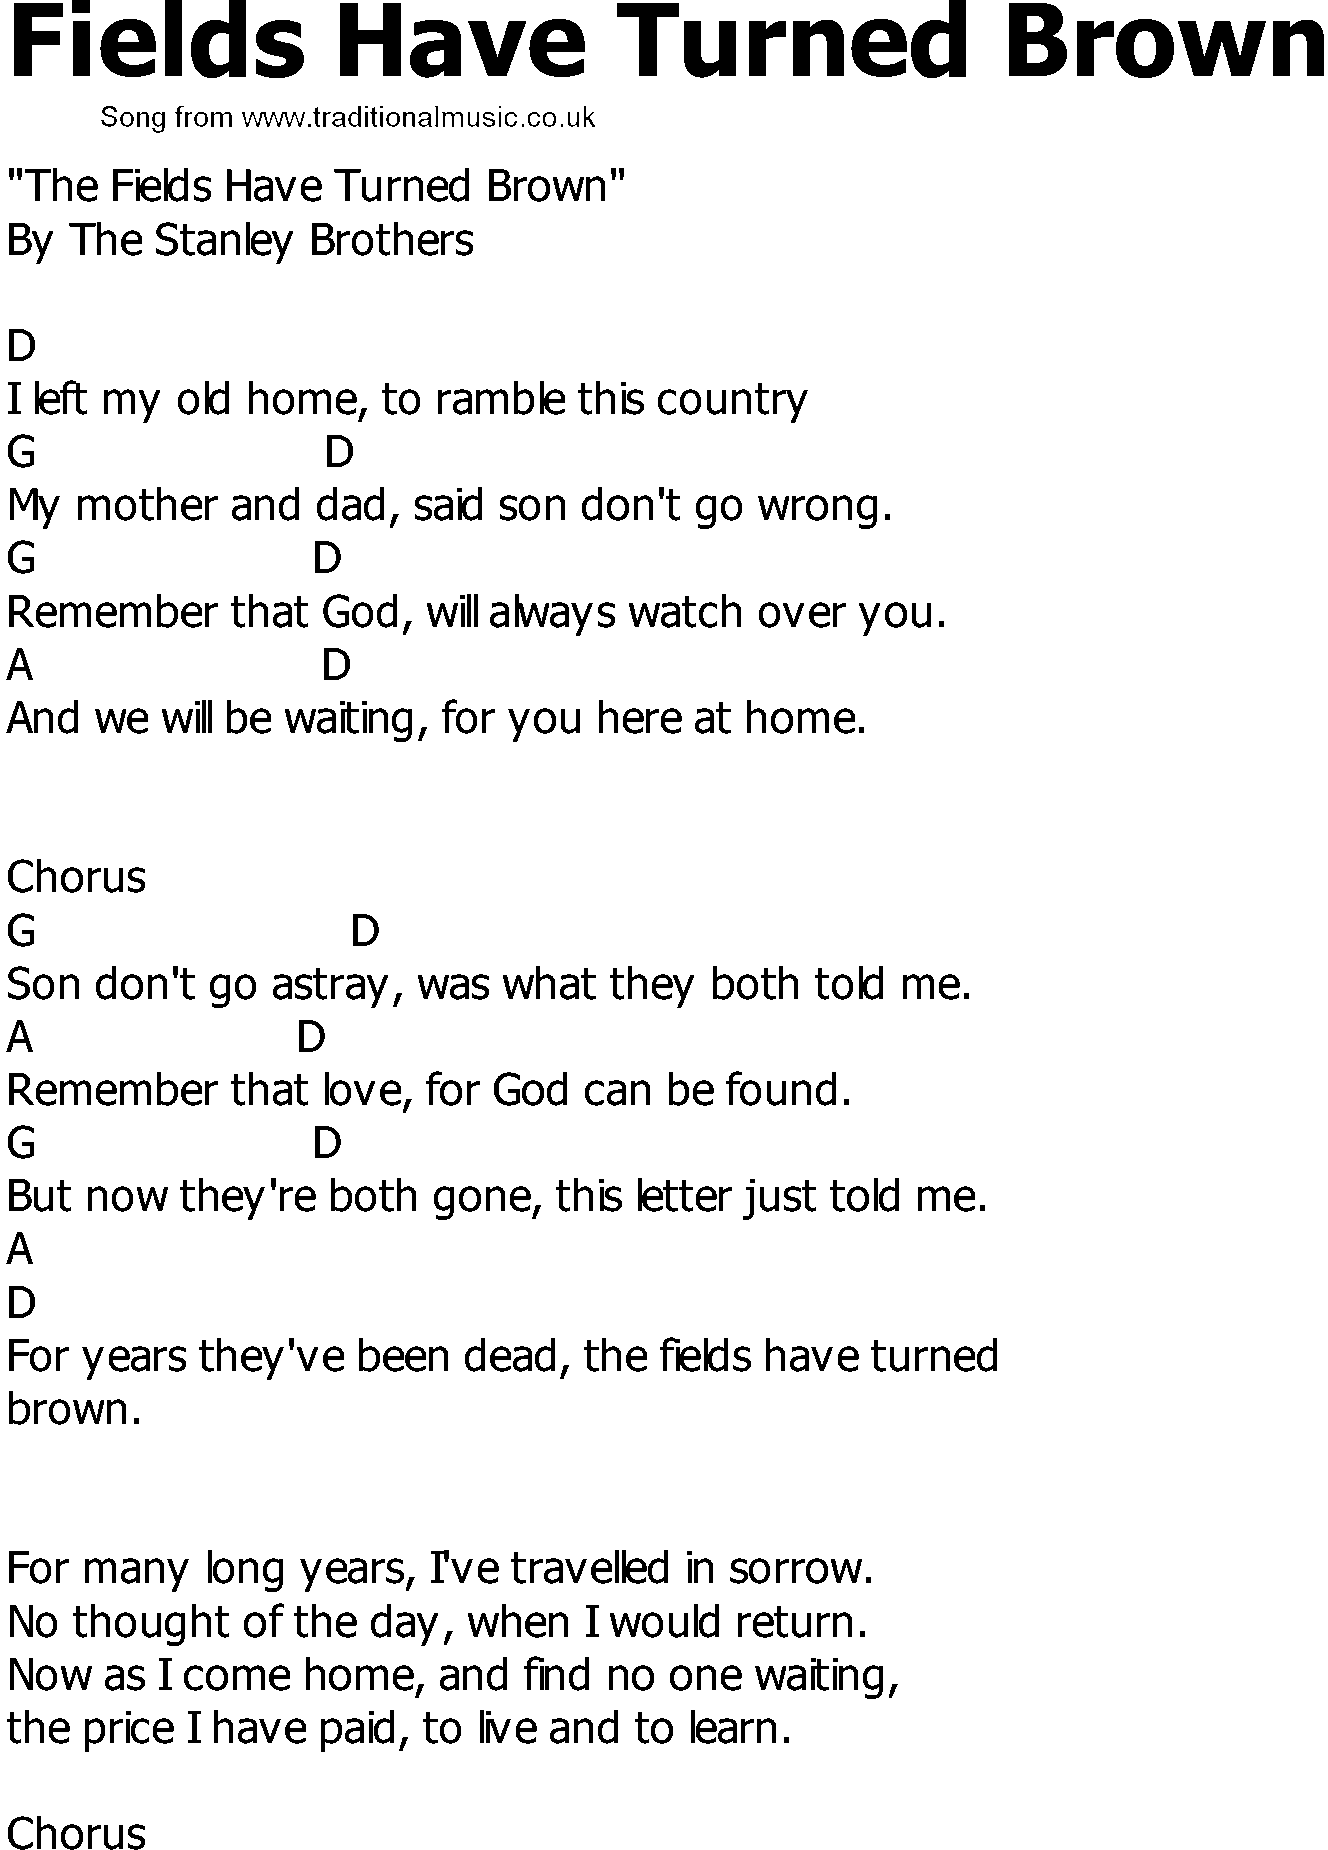 Old Country song lyrics with chords - Fields Have Turned Brown